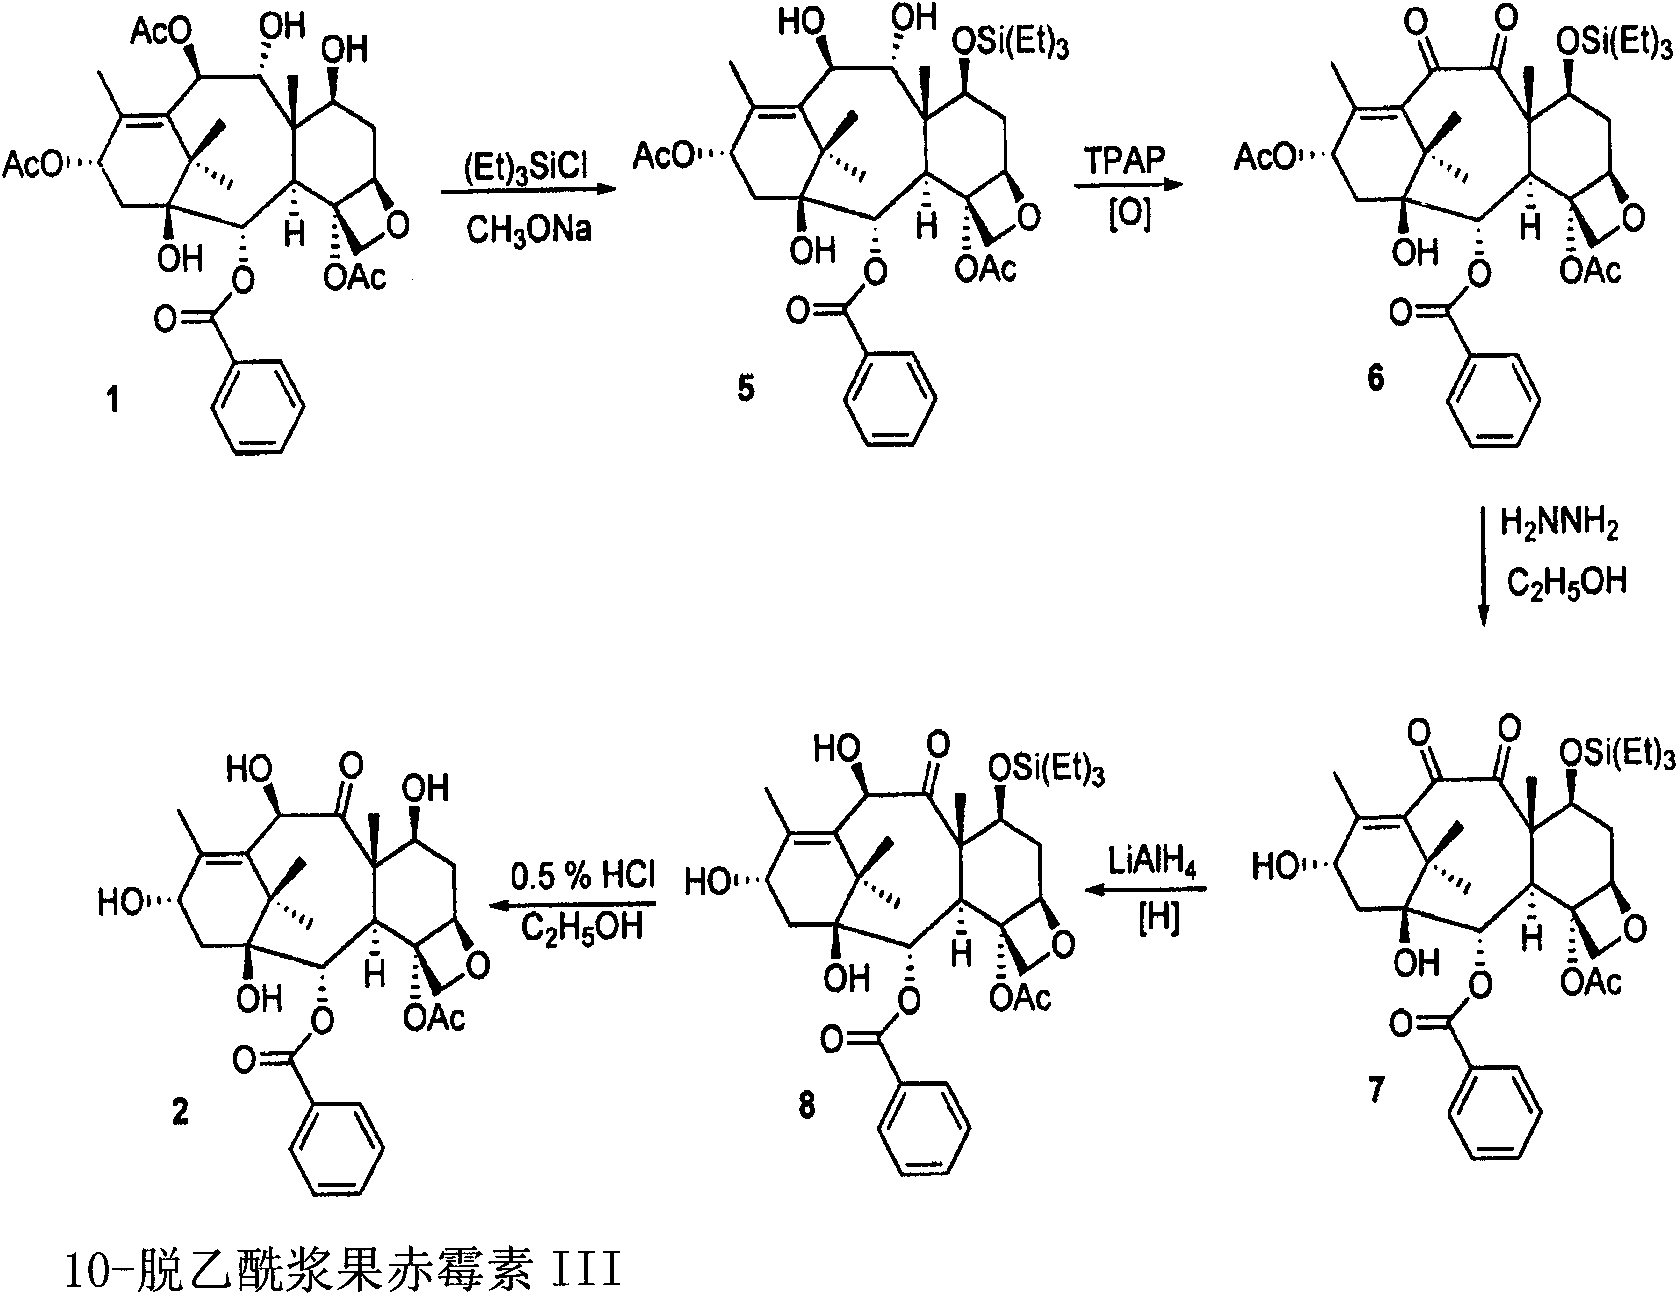 Semi-synthetic route for the preparation of paclitaxel, docetaxel and 10-deacetylbaccatin iii from 9-dihydro-13-acetylbaccatin III